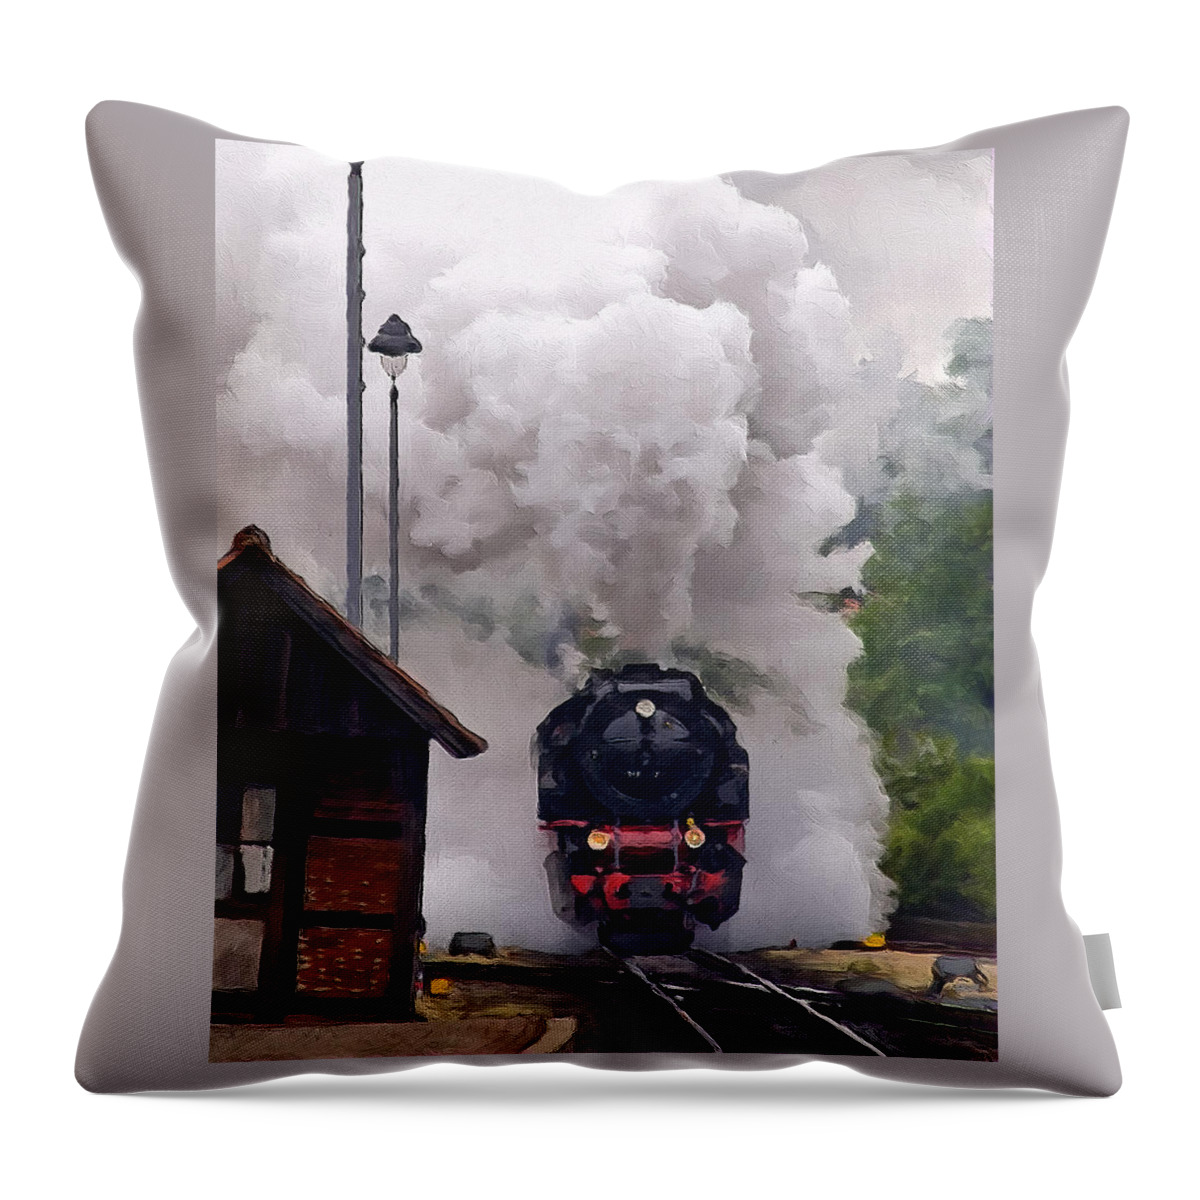 Trains Throw Pillow featuring the painting A Full Head of Steam by Michael Pickett